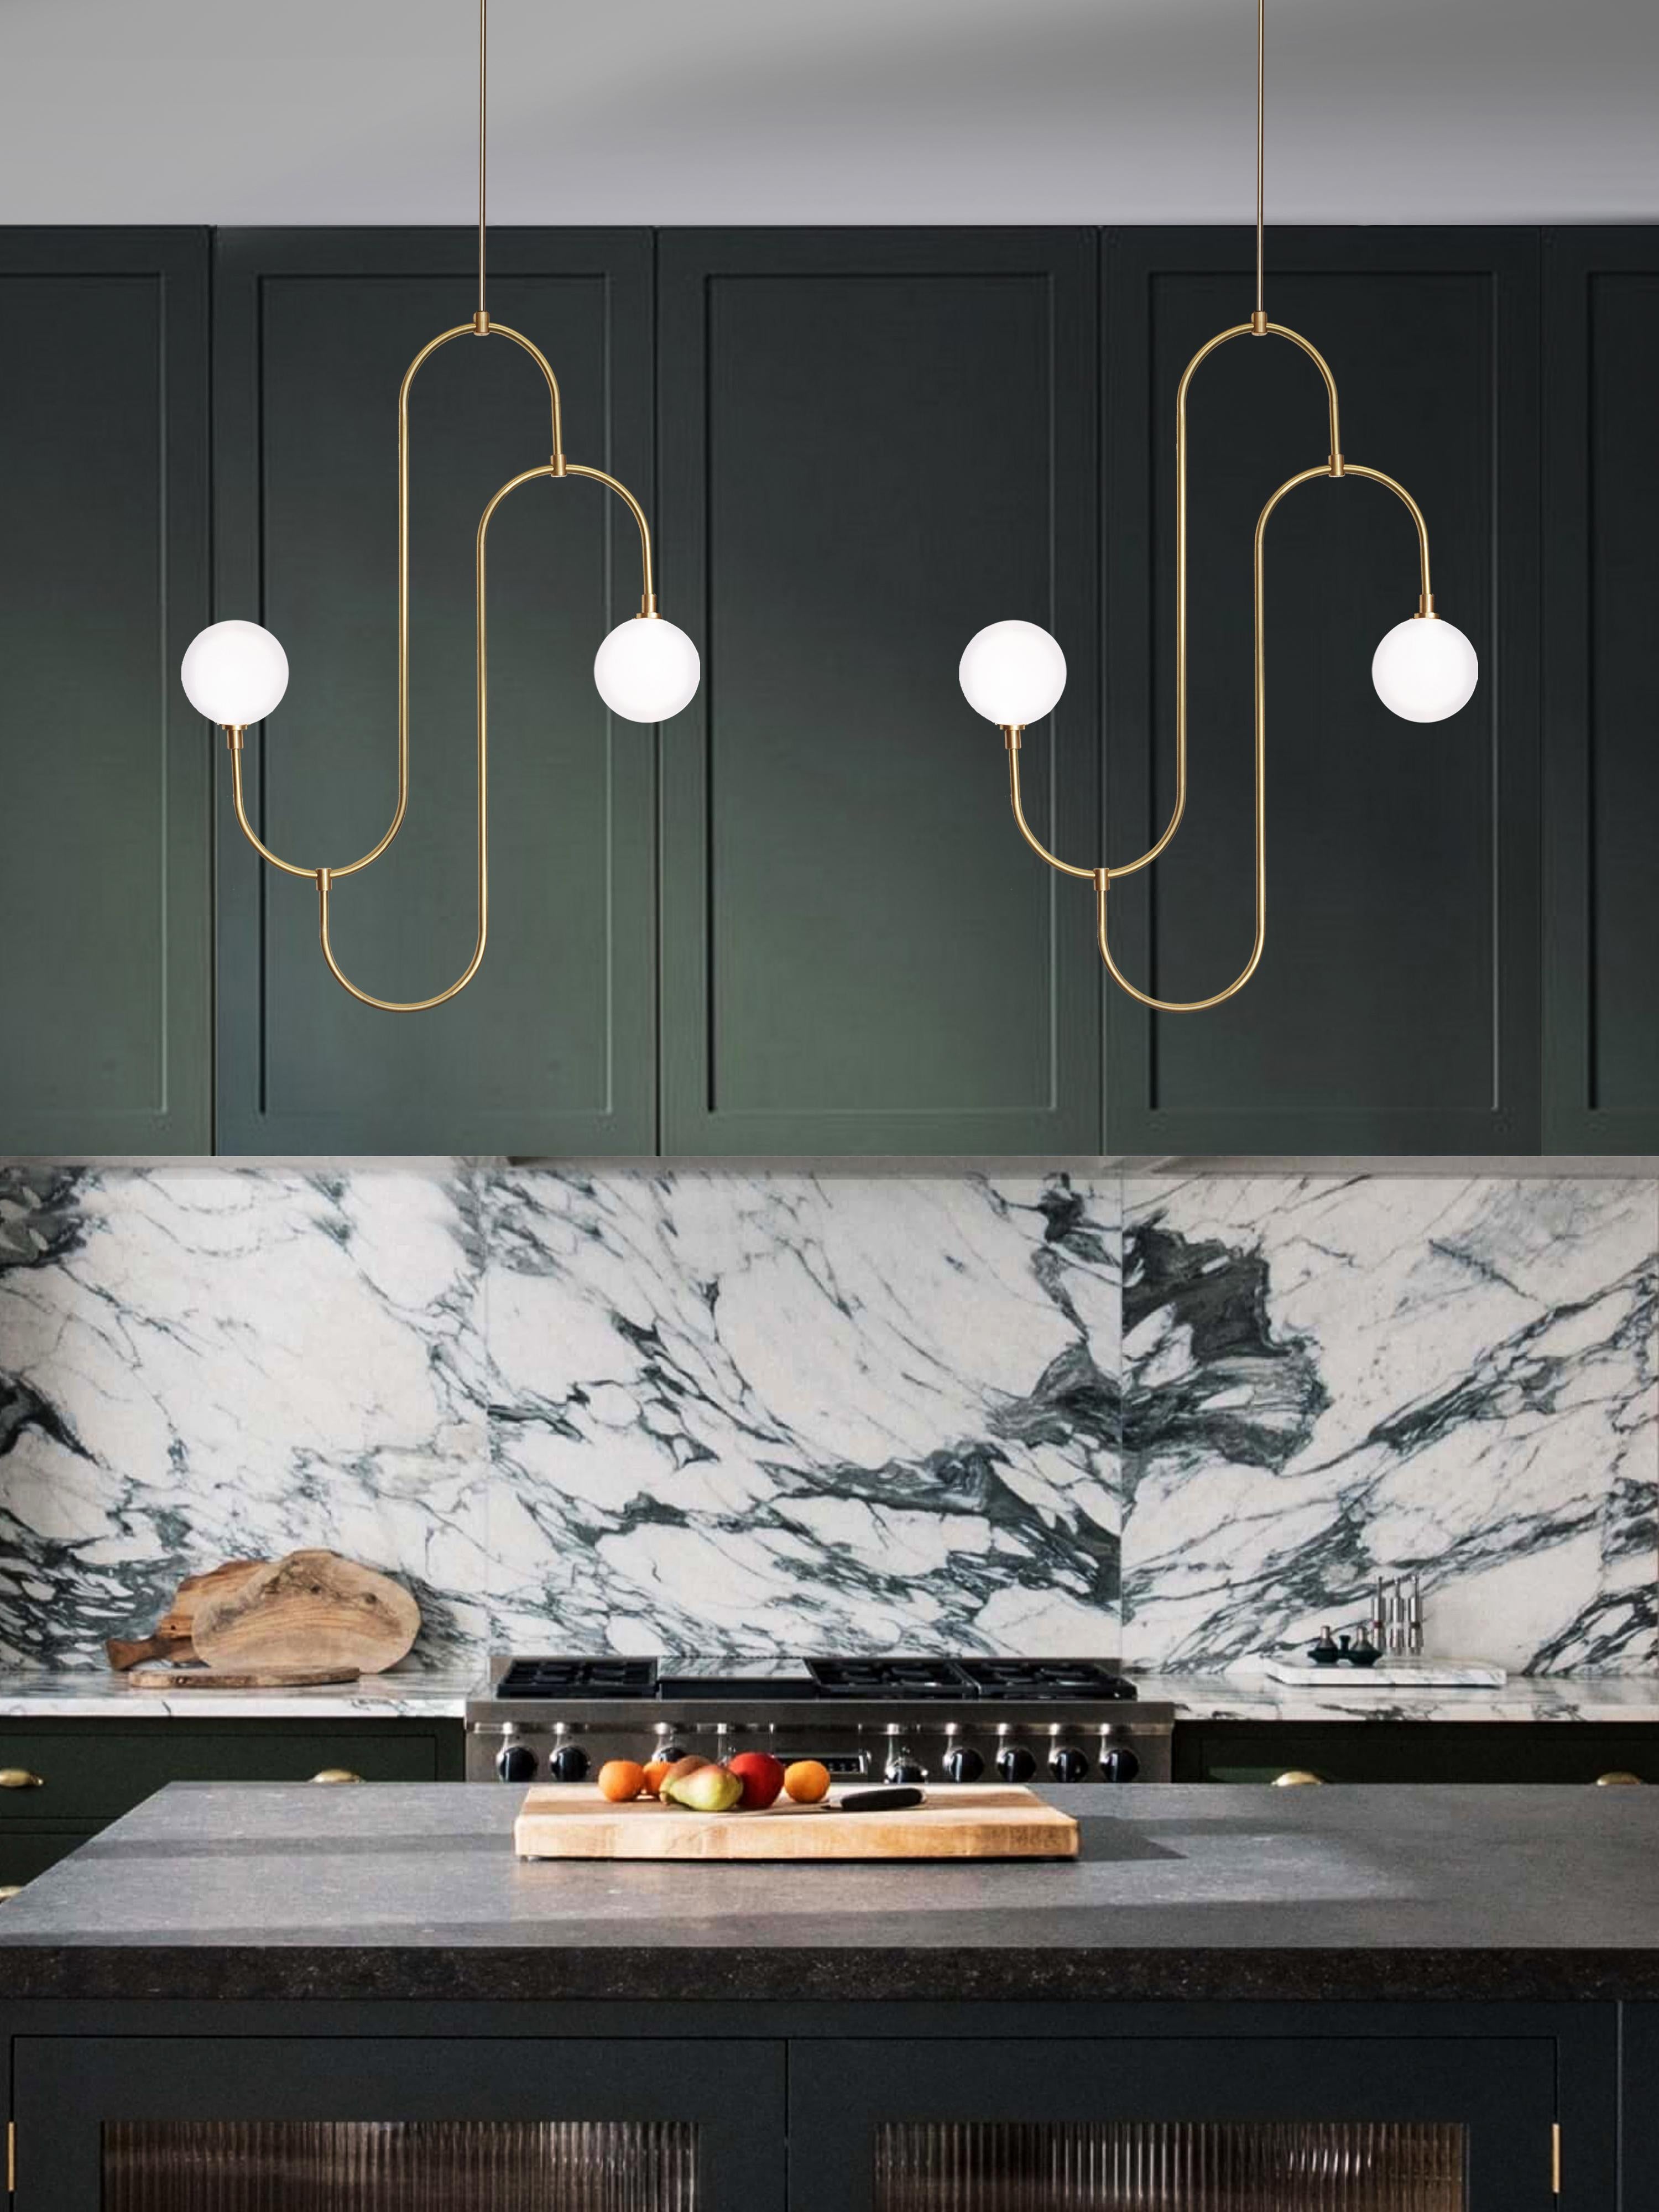 Inspired by the repeated patterns and sculptural form of 1930s jewellery design. The pendant incorporates hand bent brass arms that hold pearl white crystal glass, creating a decorative, functional lighting feature. 

G12 LED bulb
Lumens: